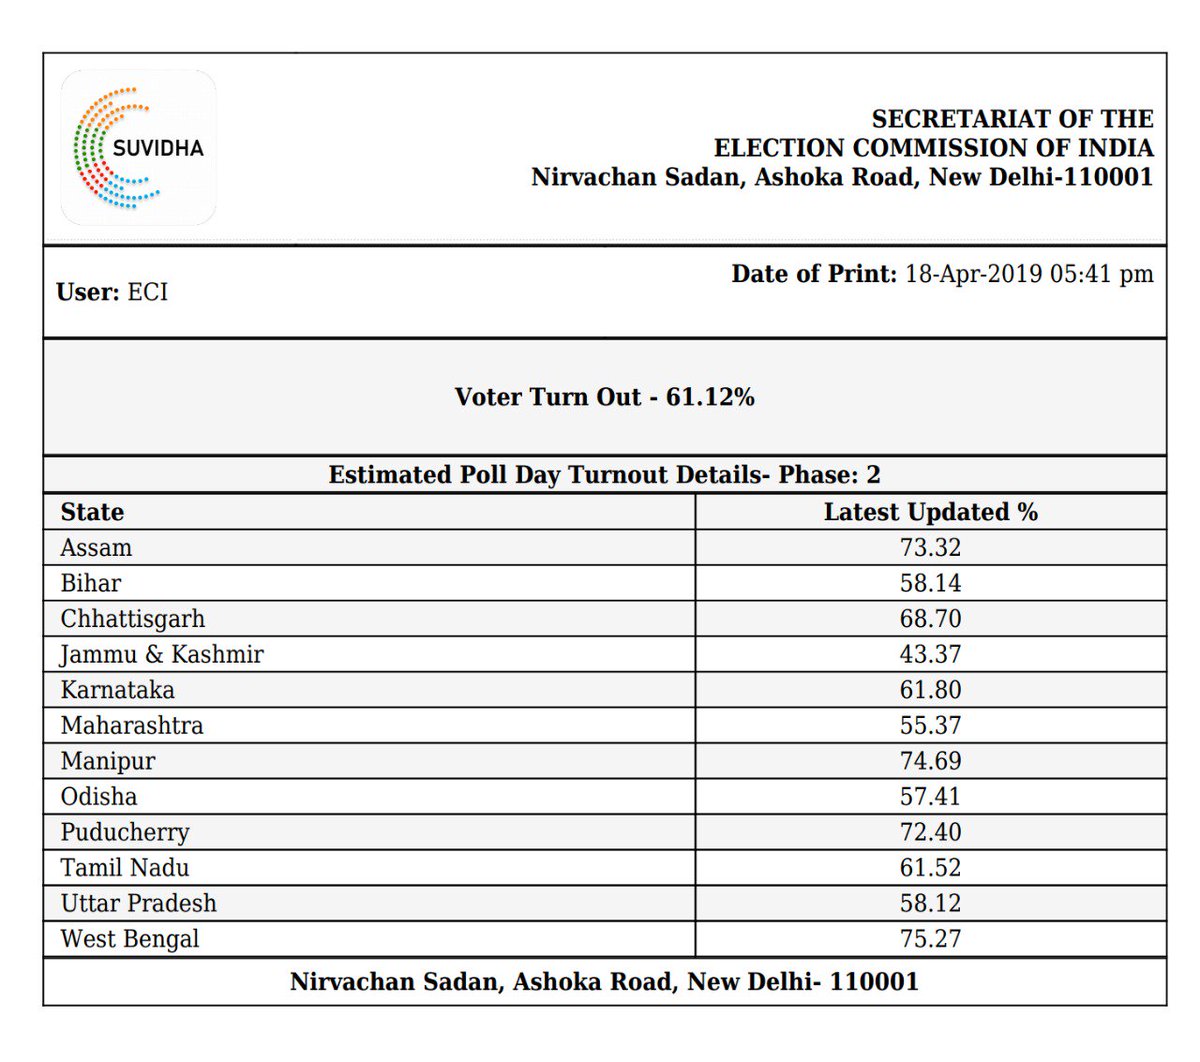 Voter Turnout, interim figures, as per the #SuvidhaApp of #ECI for the 2nd Phase of #LokSabhaElections2019 , #IndiaElections2019 Poll Turnout 61.12% at 5.40 PM